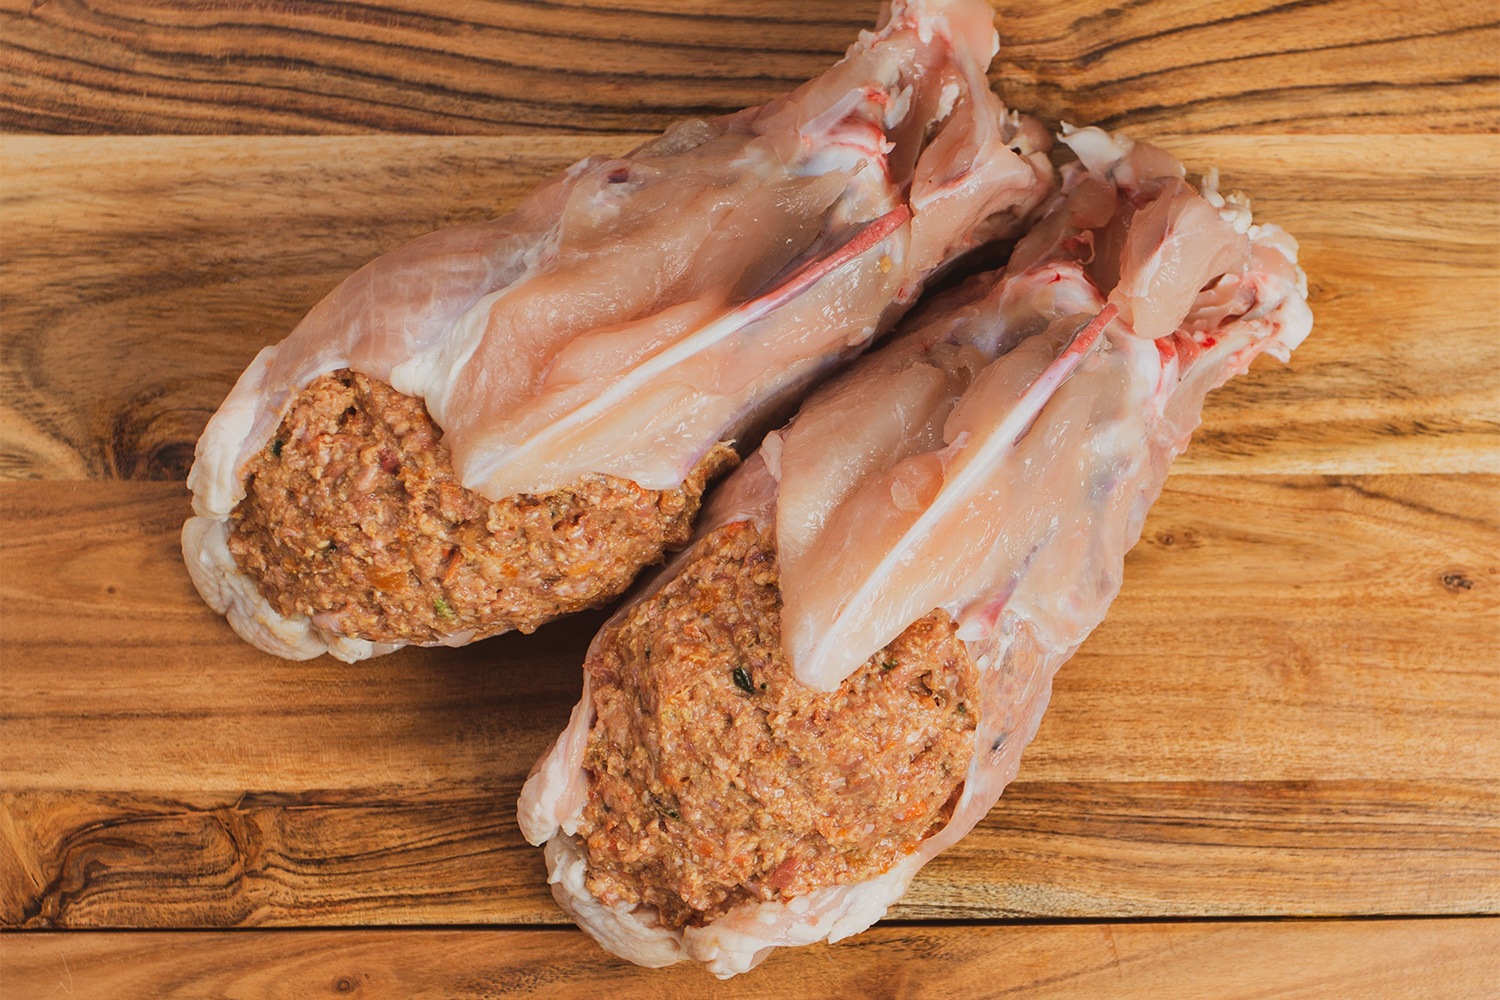 A mouthwatering dog treat - stuffed chicken dog food, featuring a delightful blend of flavours and textures to entice your furry friend.